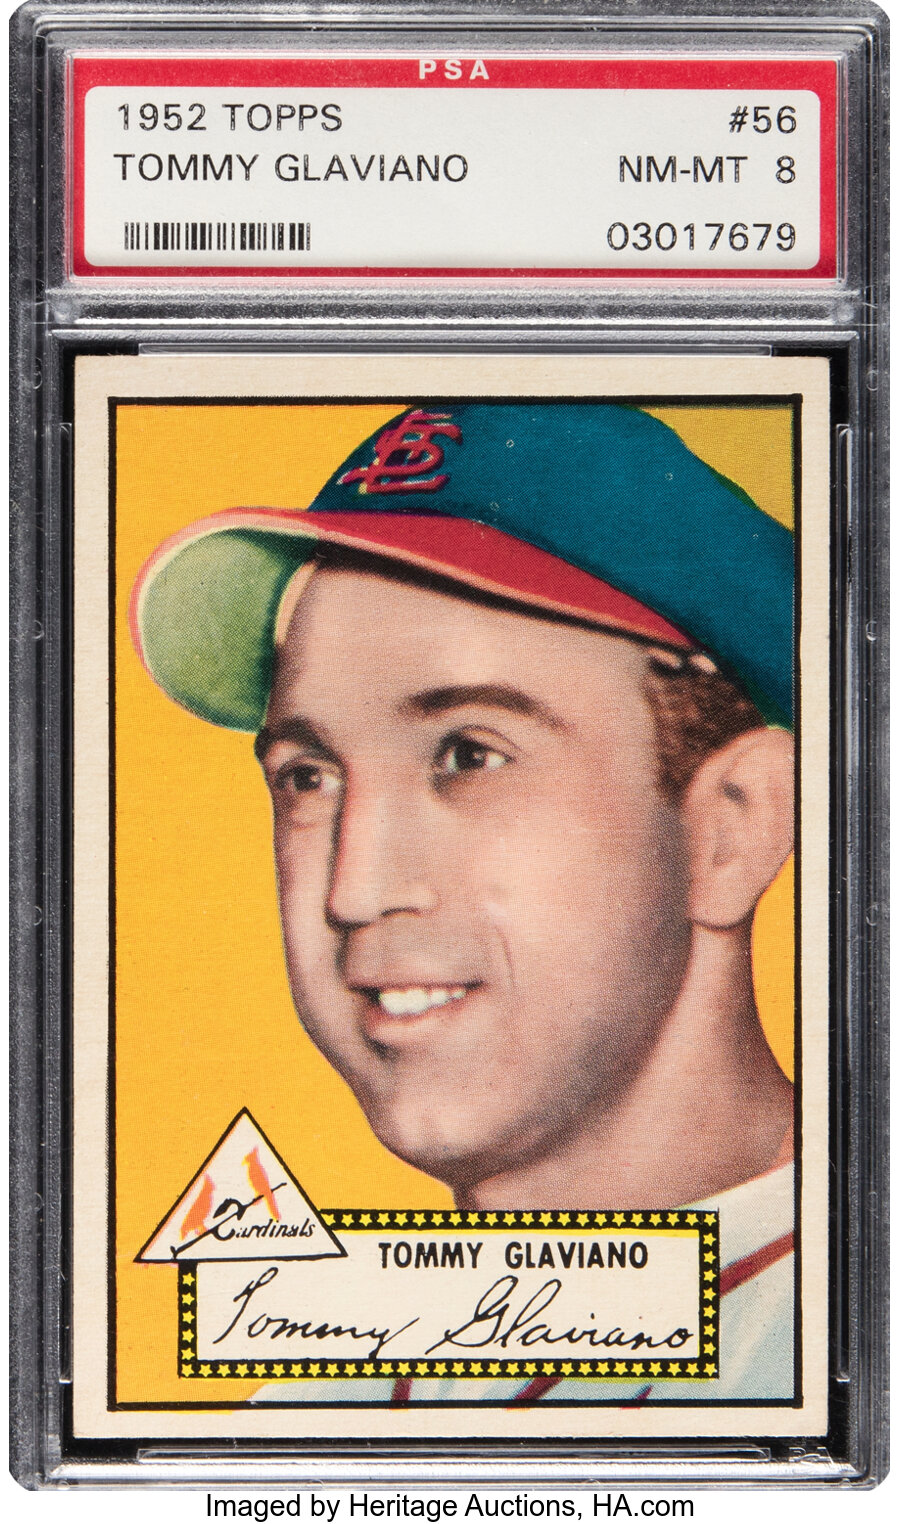 1952 Topps Tommy Glaviano #56 PSA NM-MT 8 - Three Higher!